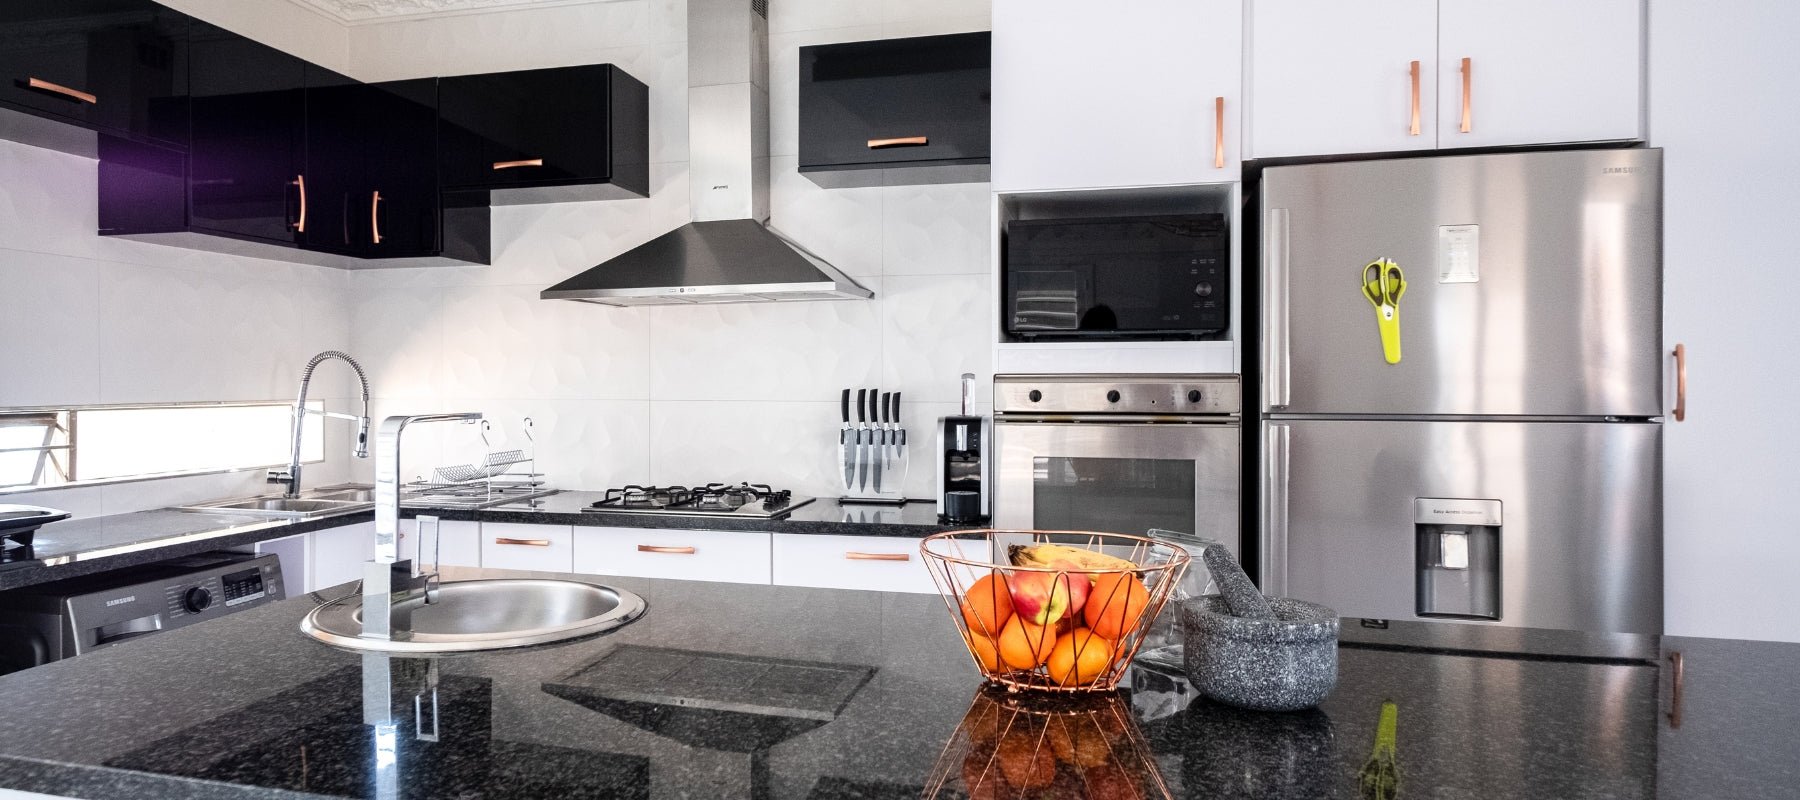 Modern Kitchens designed by UCAN and delivered within 14 days from payment.